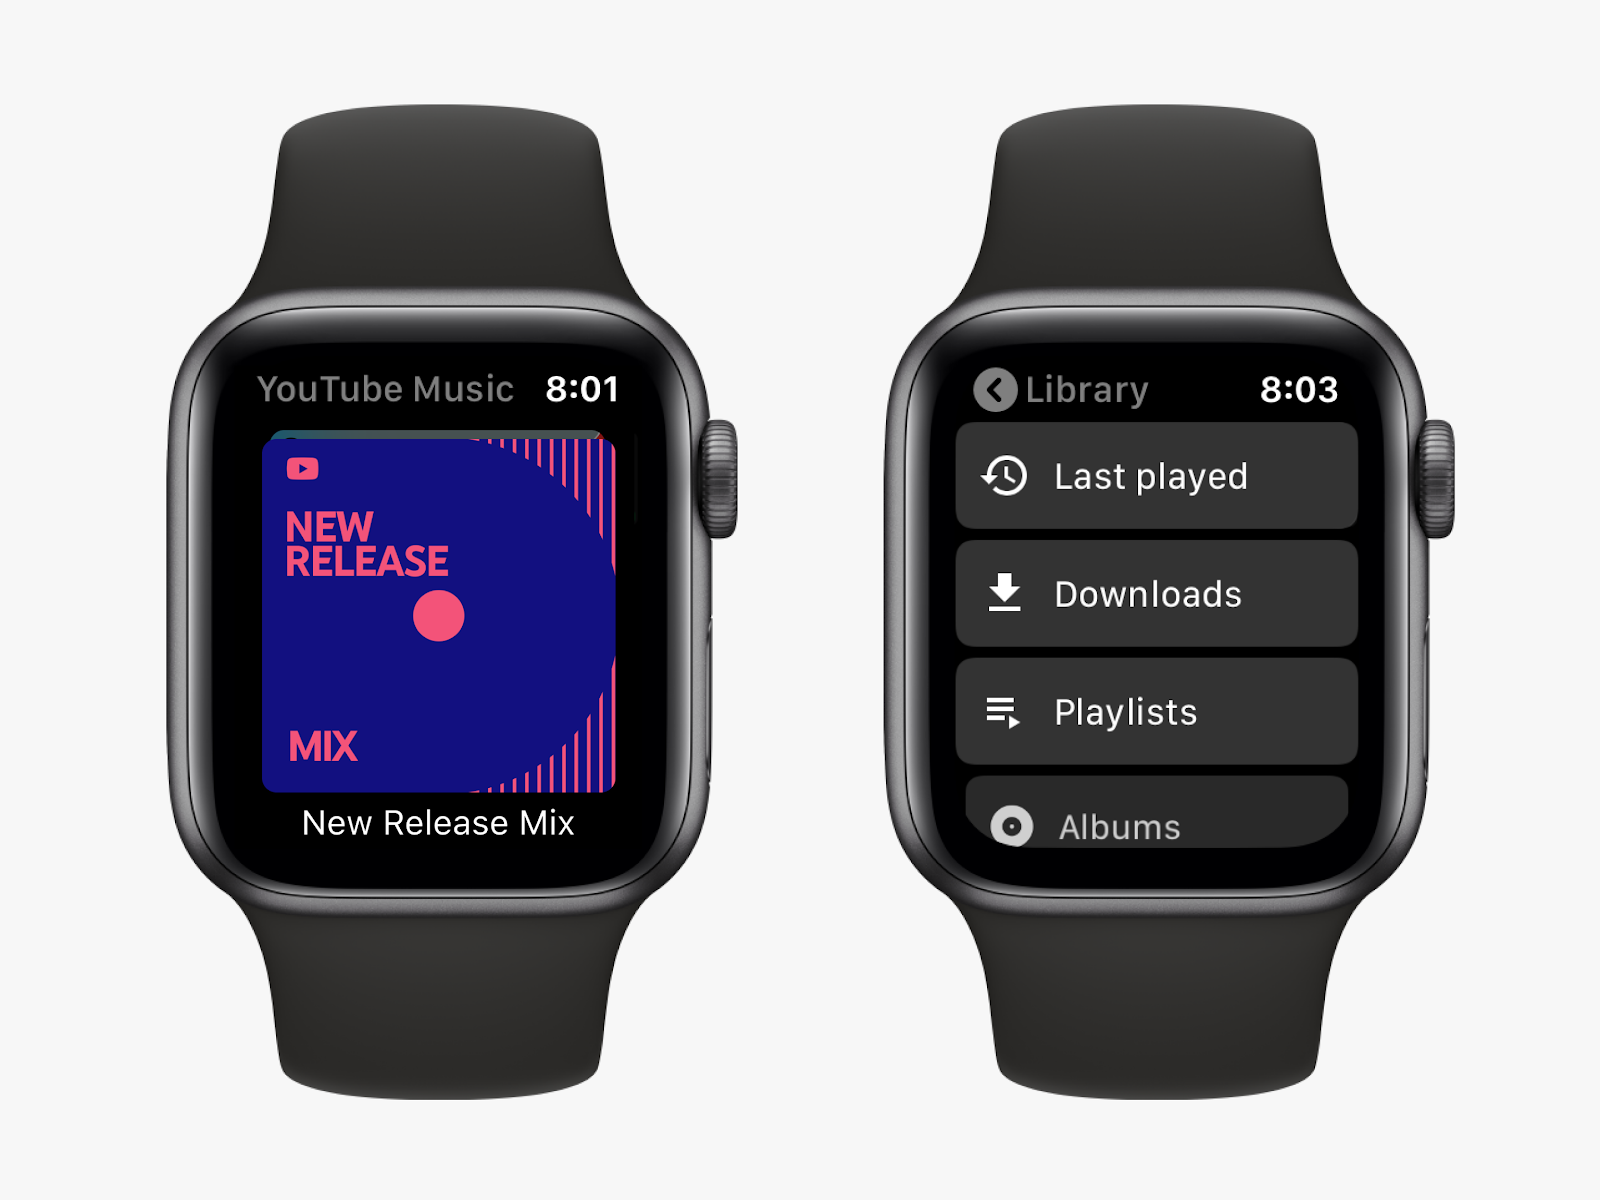 Google launches a YouTube Music app on Apple Watch